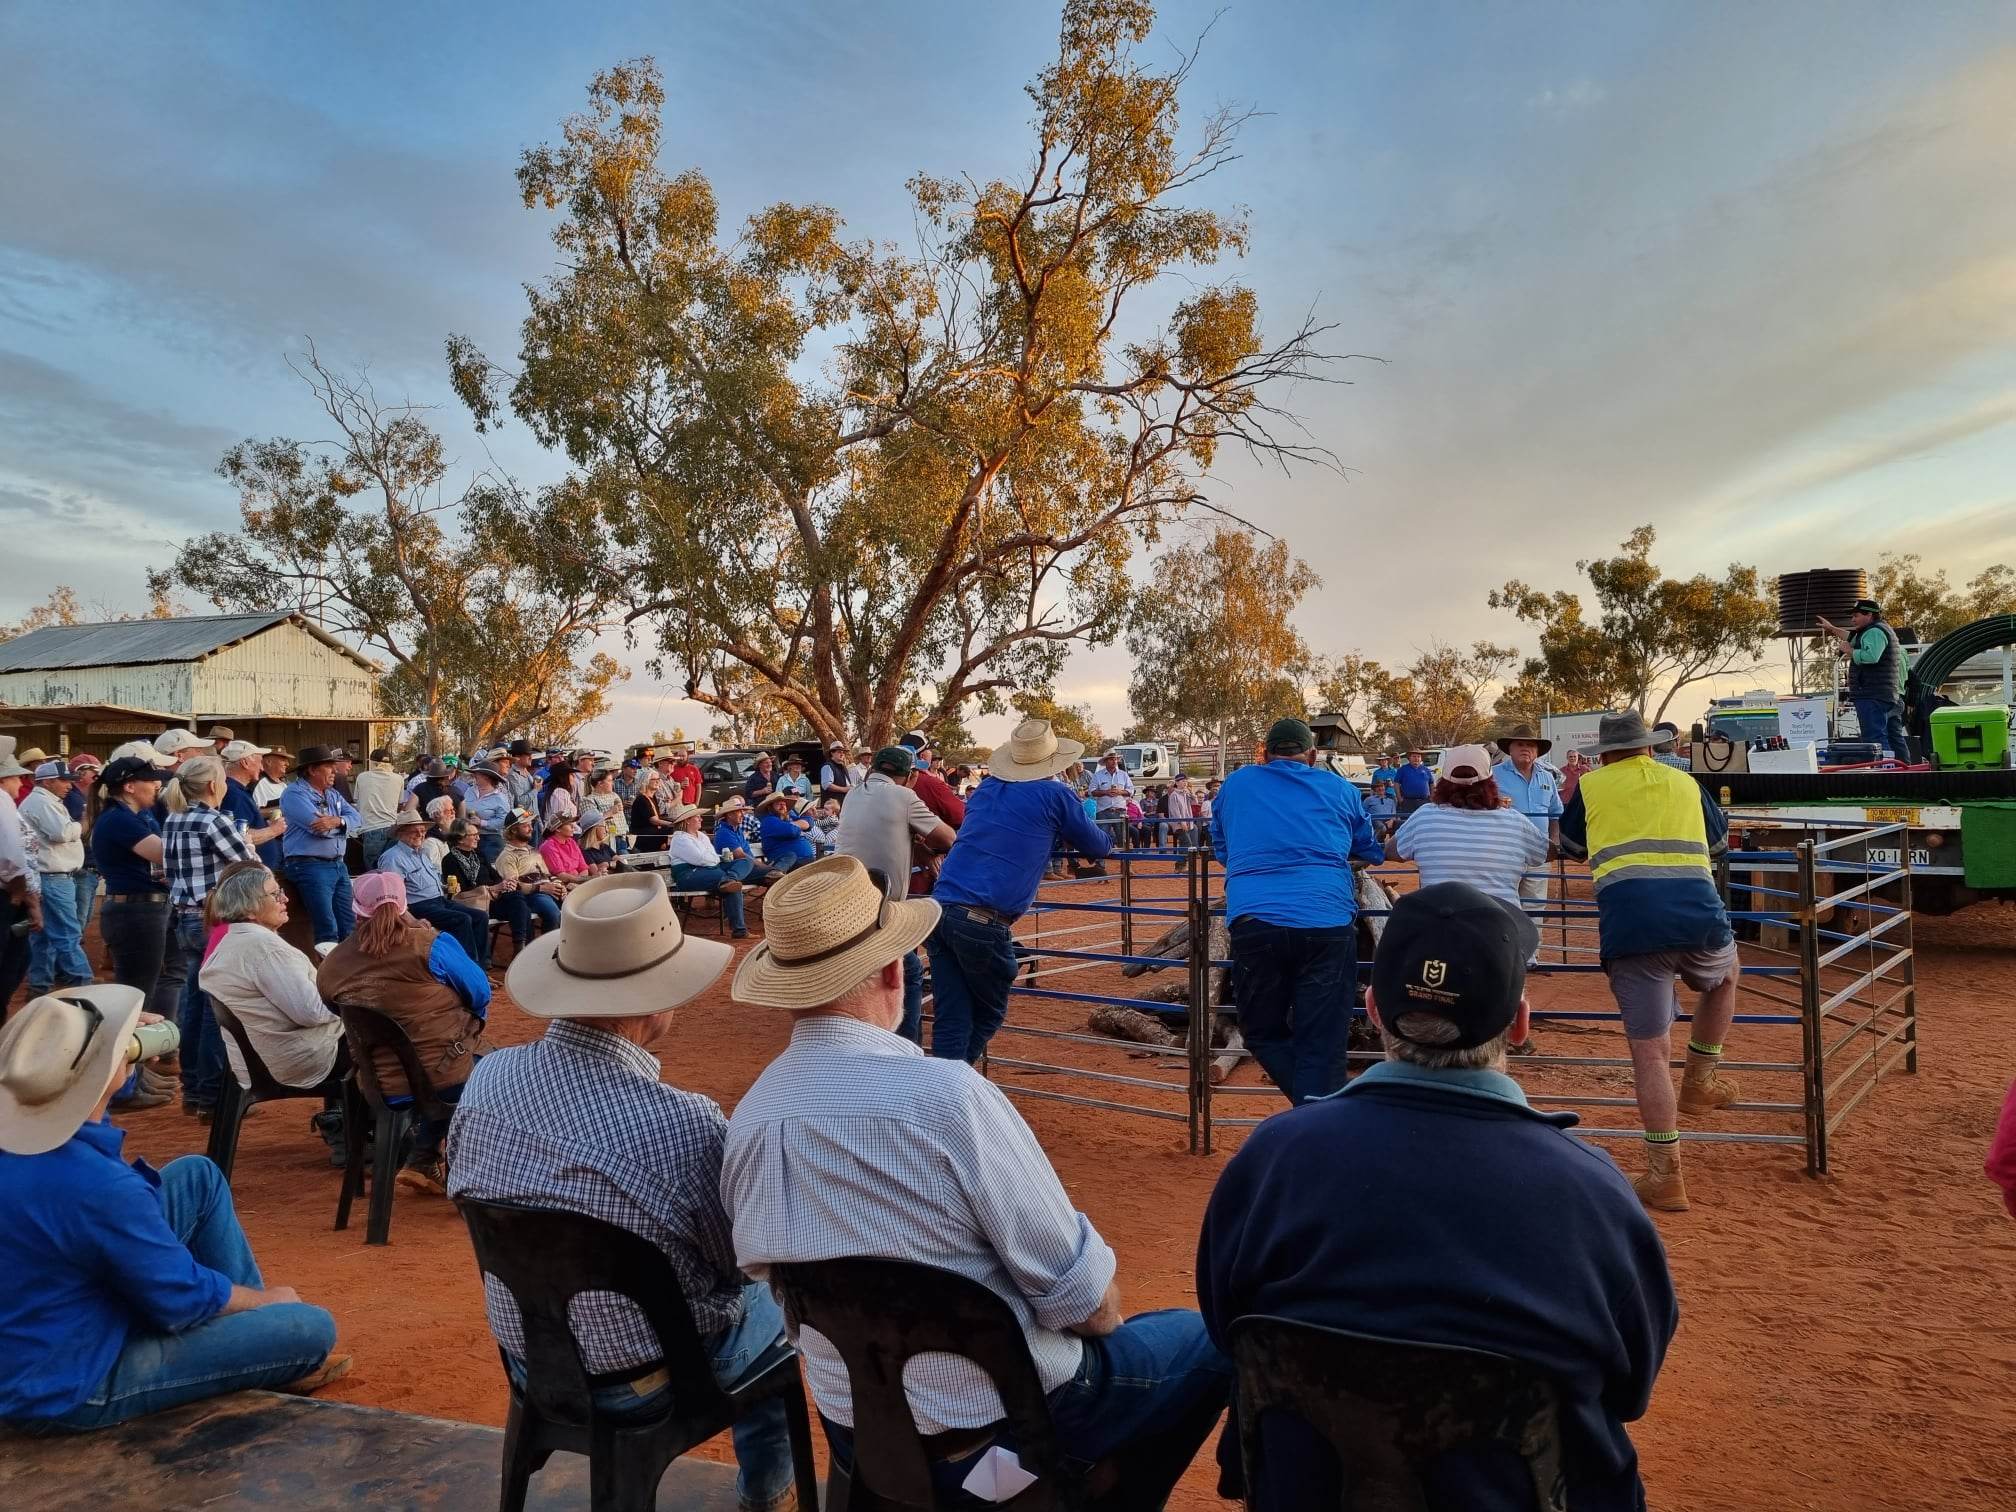 Australia’s remotest field day returns to Hungerford